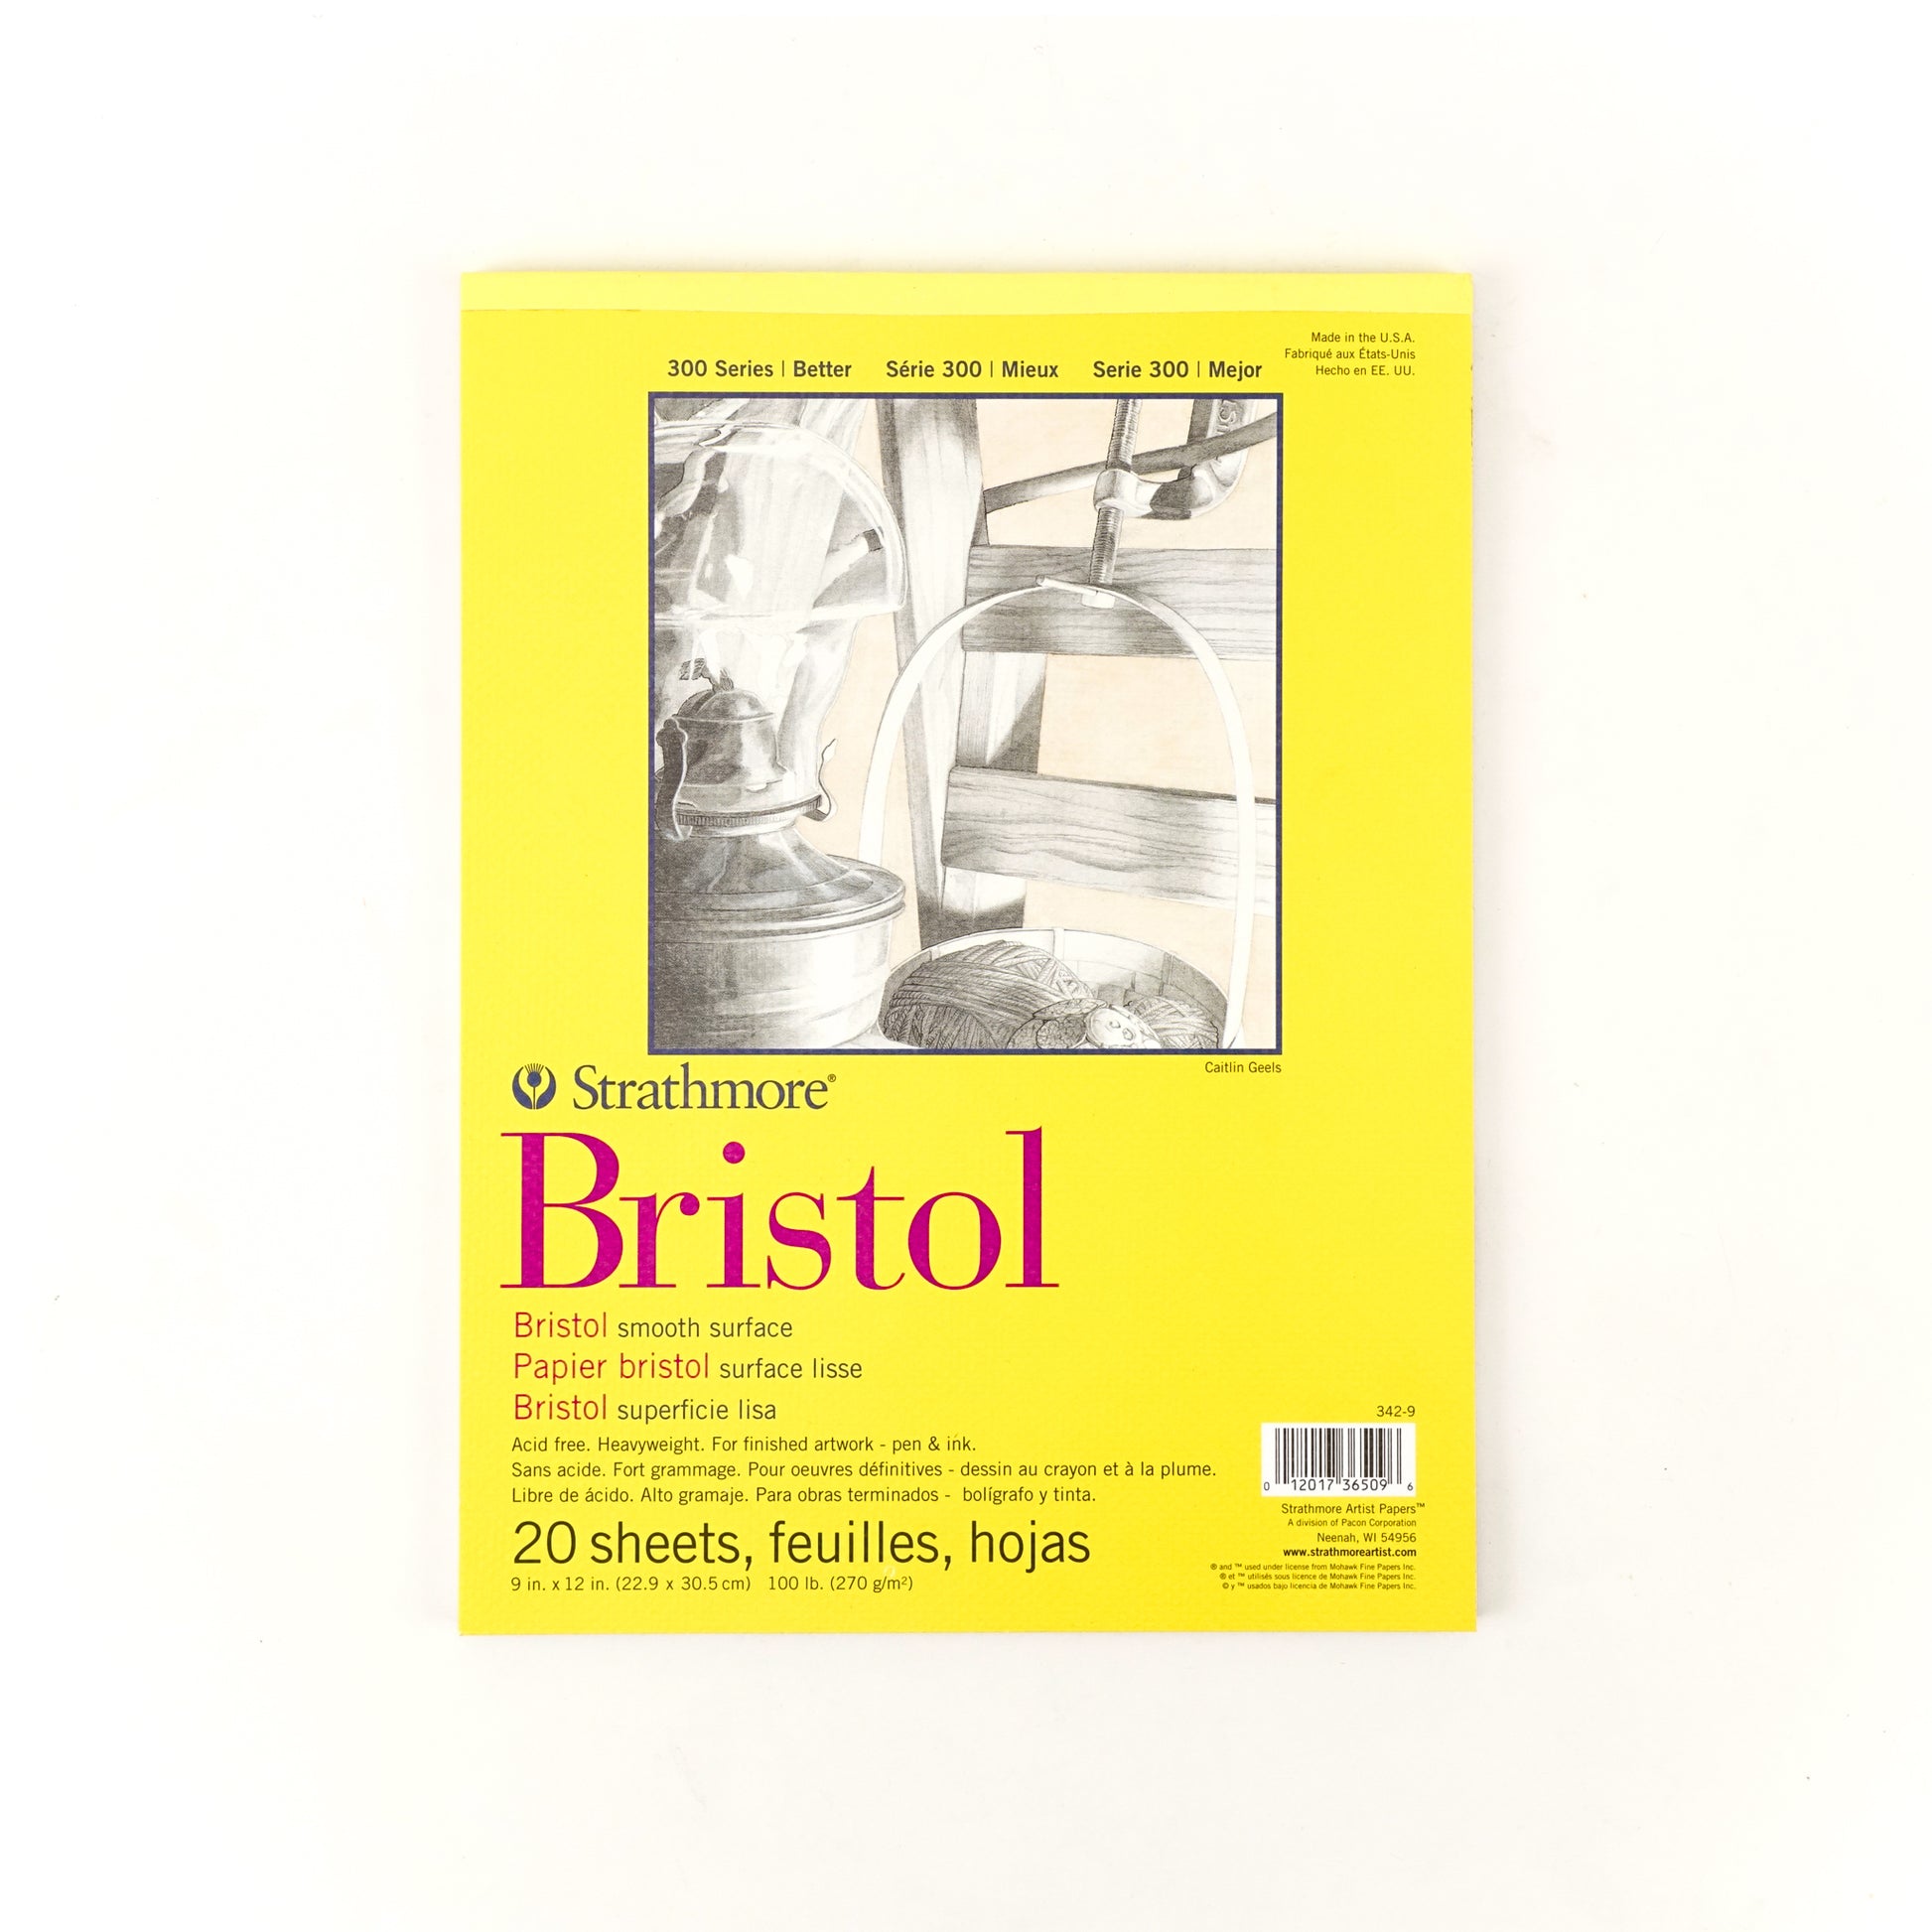 Lot of 3 - Strathmore Bristol Smooth Paper Pad, 14x17, 20 Sheets